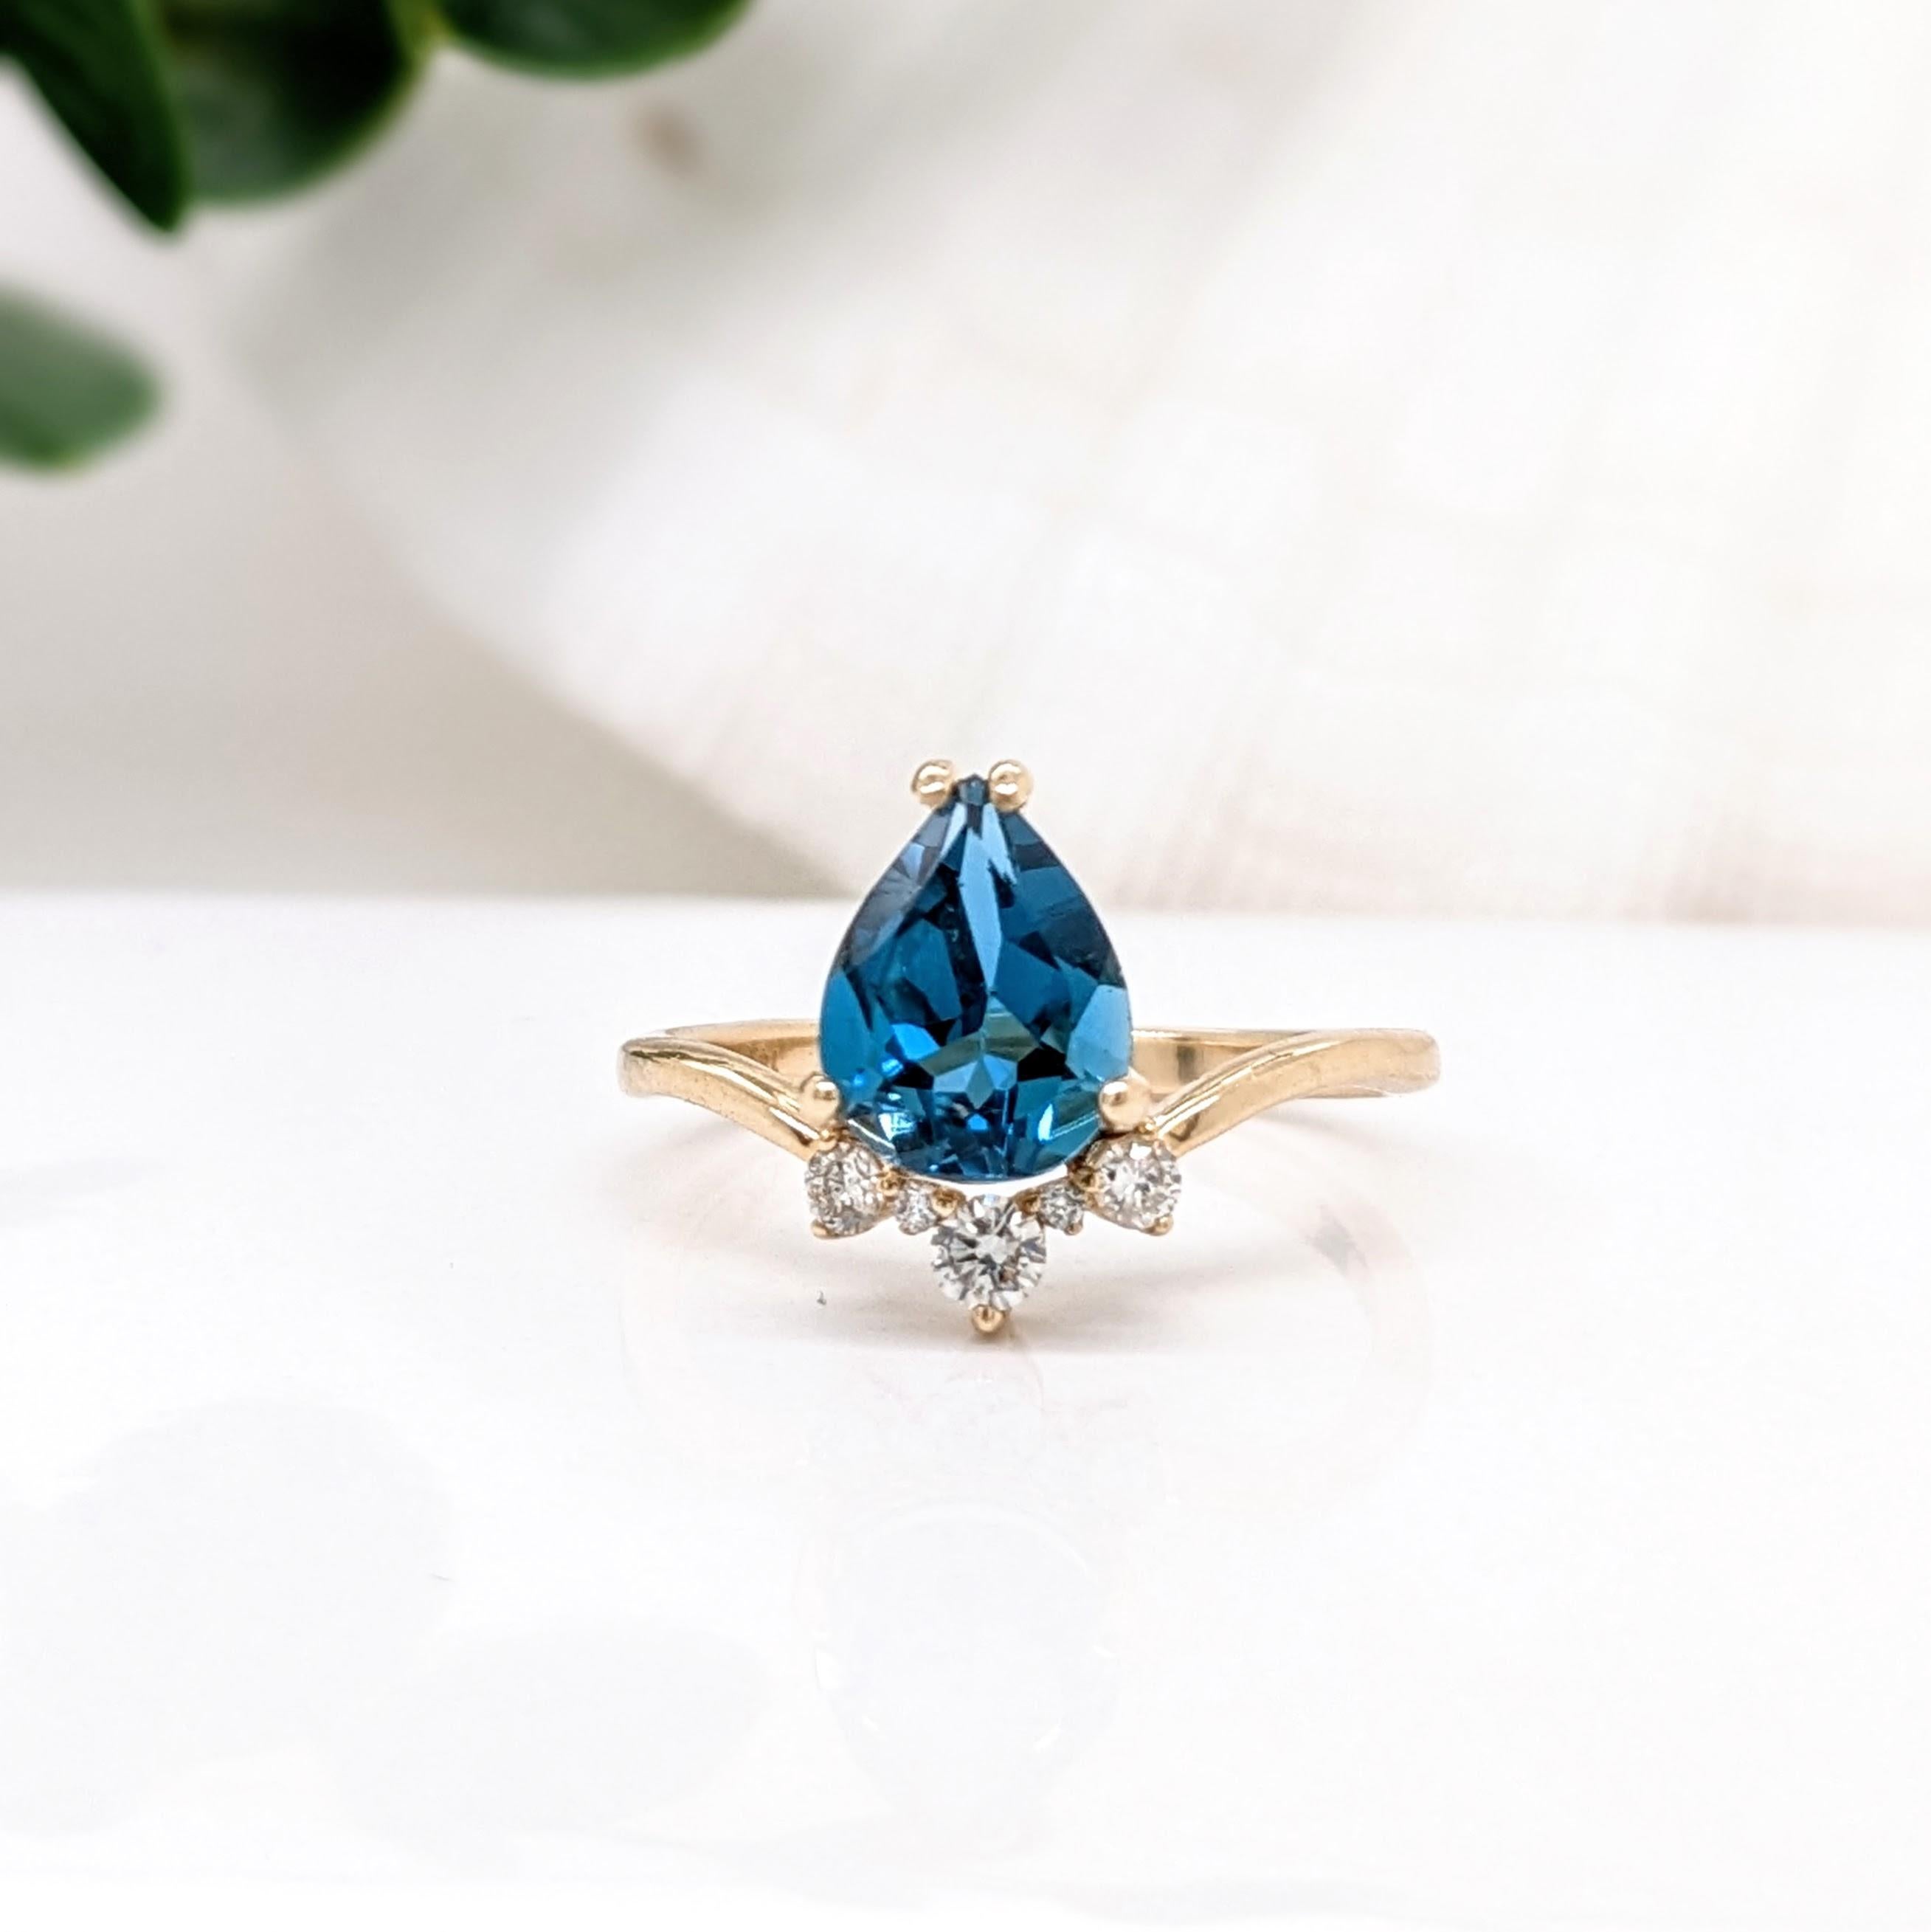 A gorgeous pear cut london blue topaz set in a 14k yellow gold ring with diamond accents in a shape reminiscent of a tiara. A beautiful and unique ring for any occasion!

Specifications:

Item Type: Ring
Center Stone: London Topaz
Treatment: